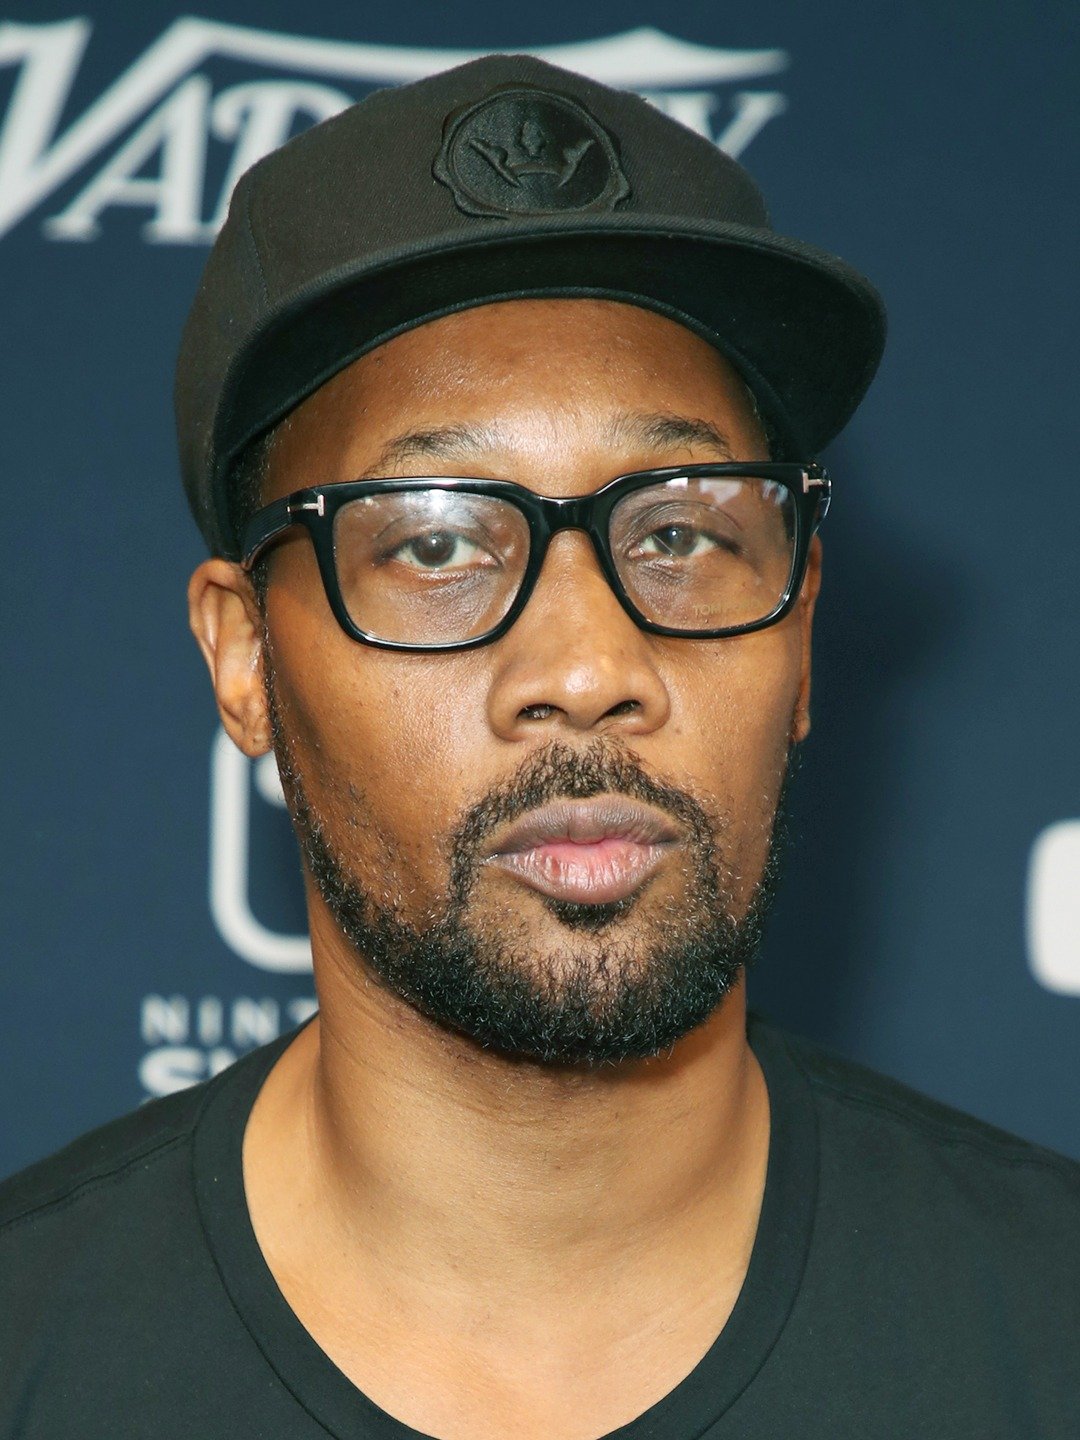 How tall is RZA?